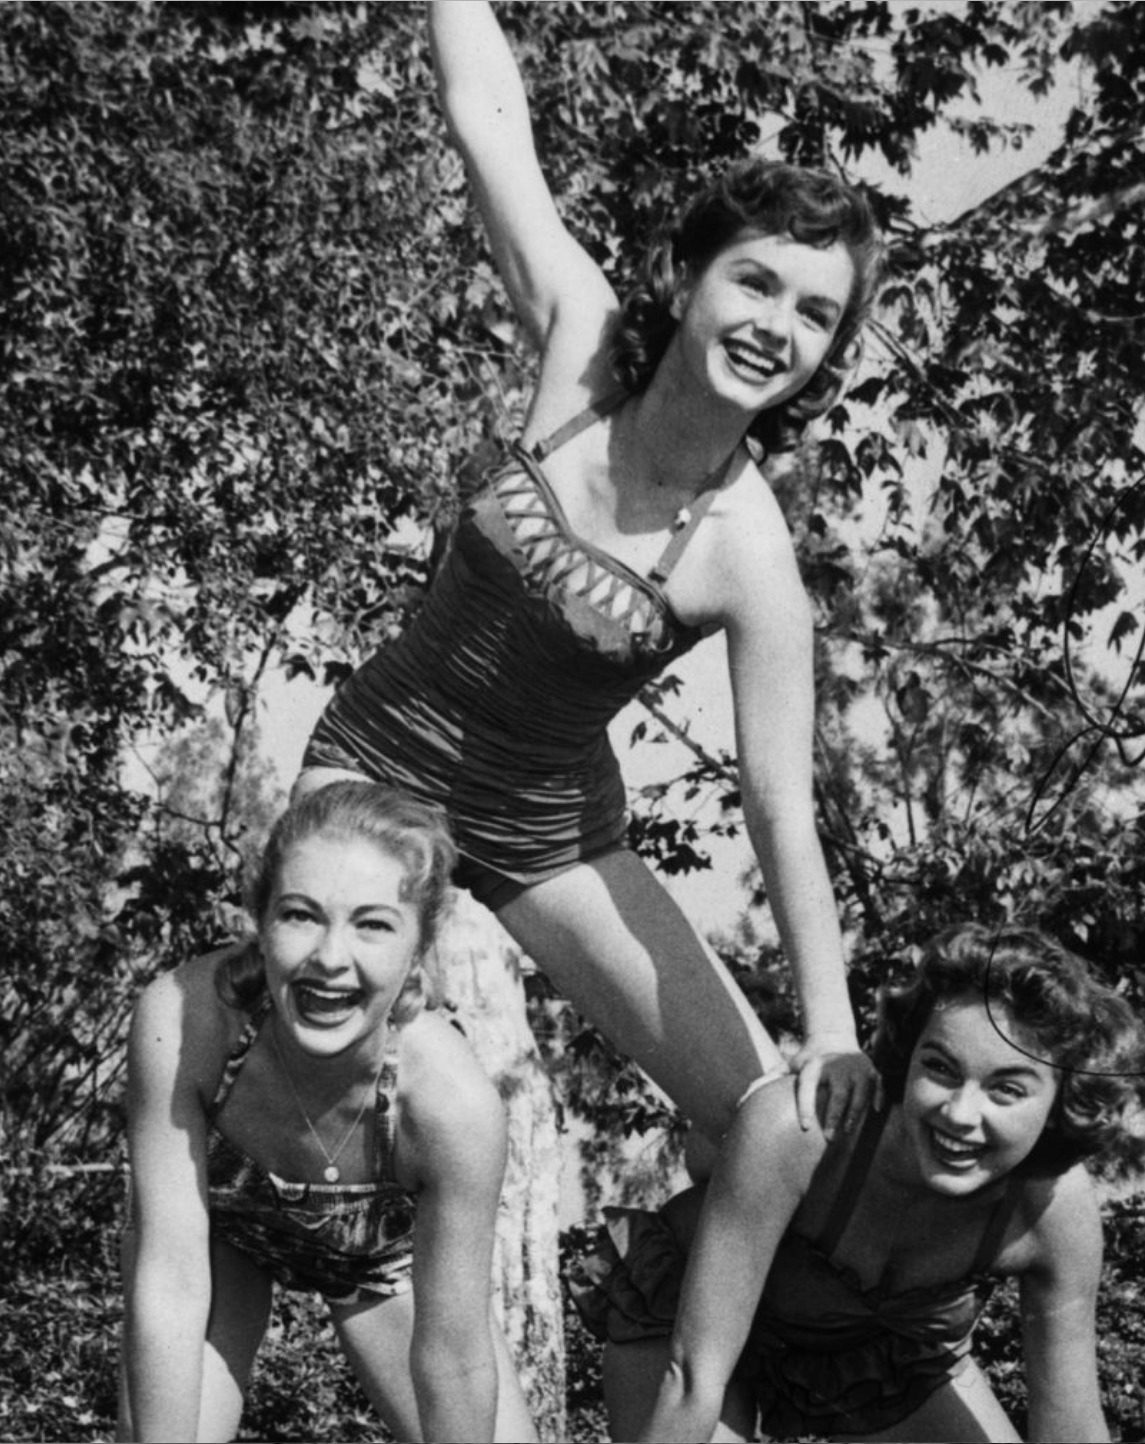 Lori Nelson, Debbie Reynolds, and Terry Moore, 1954